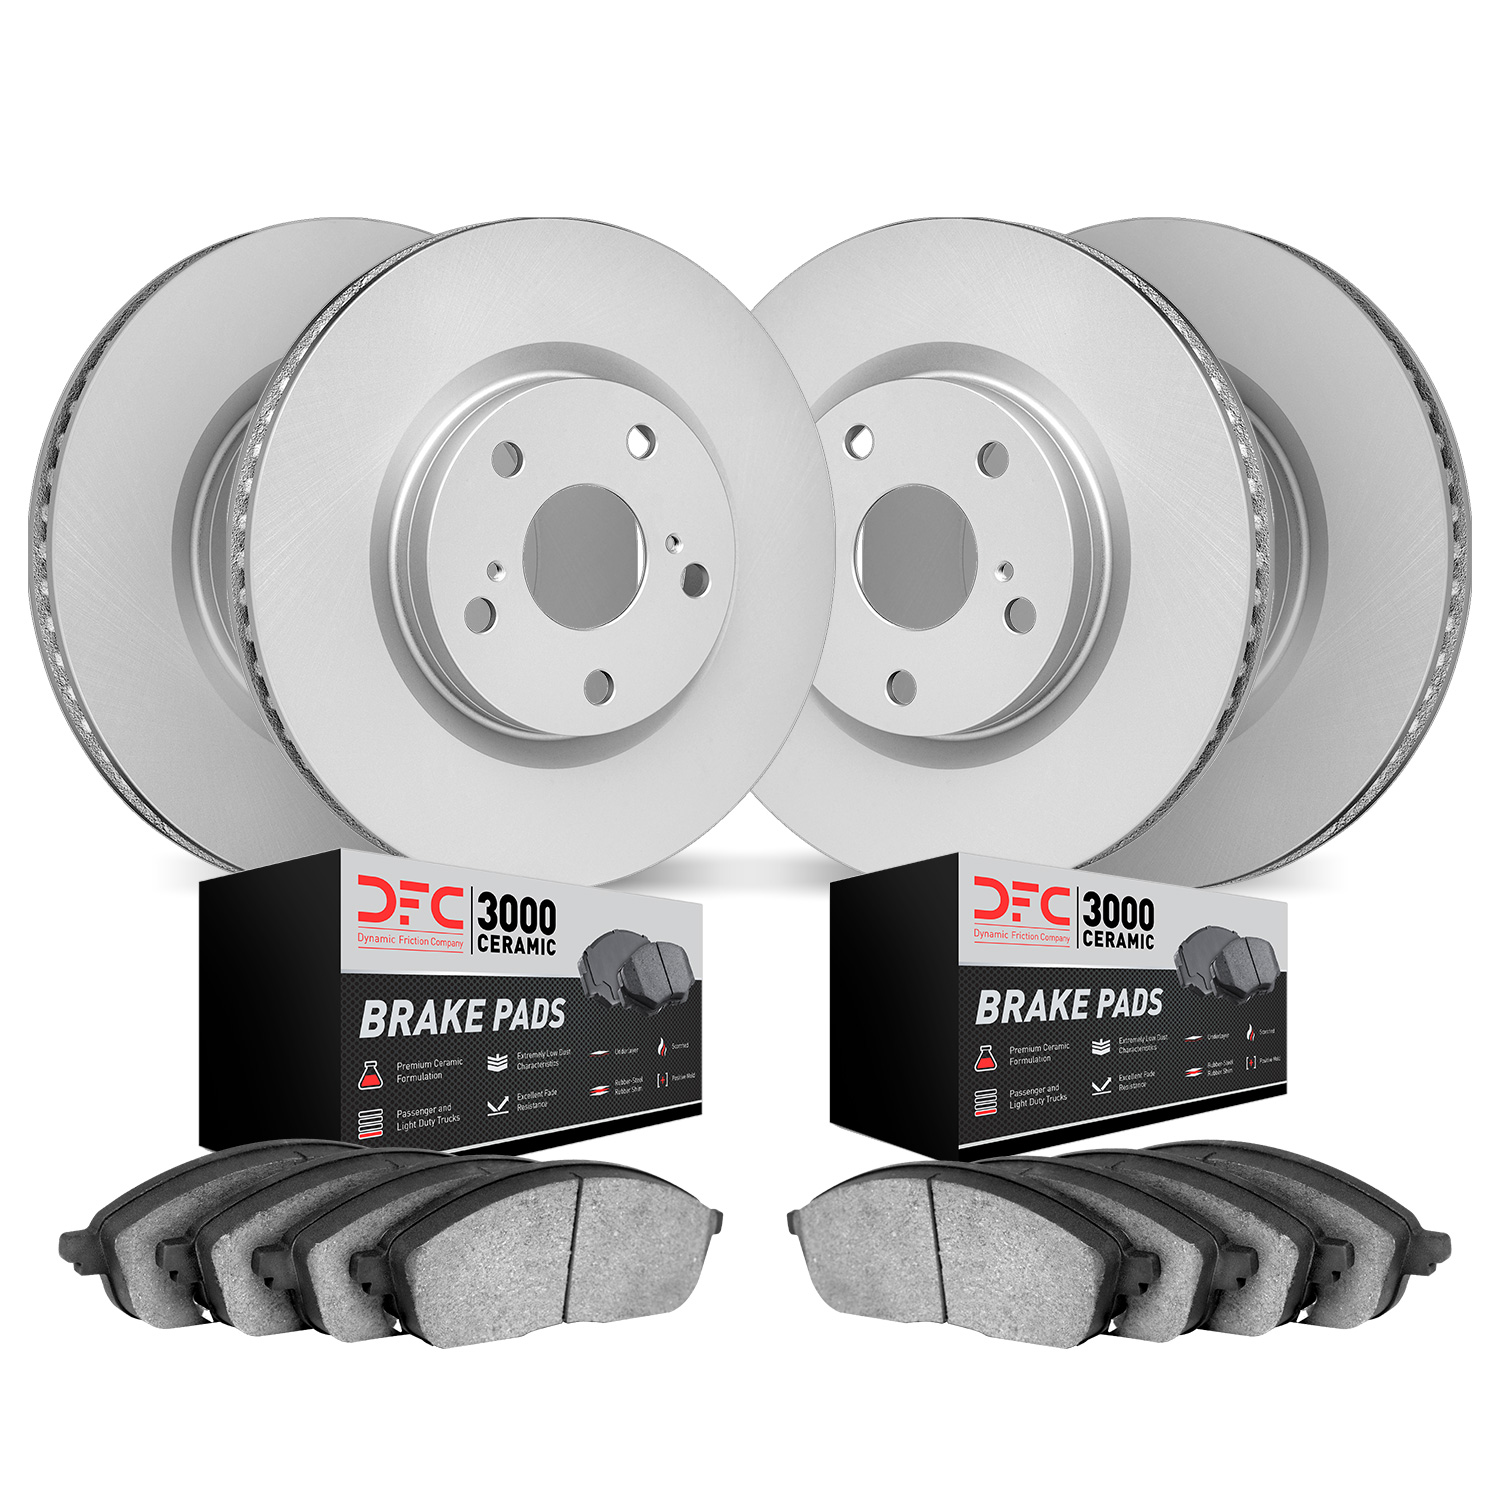 4304-31049 Geospec Brake Rotors with 3000-Series Ceramic Brake Pads Kit, 2007-2018 BMW, Position: Front and Rear